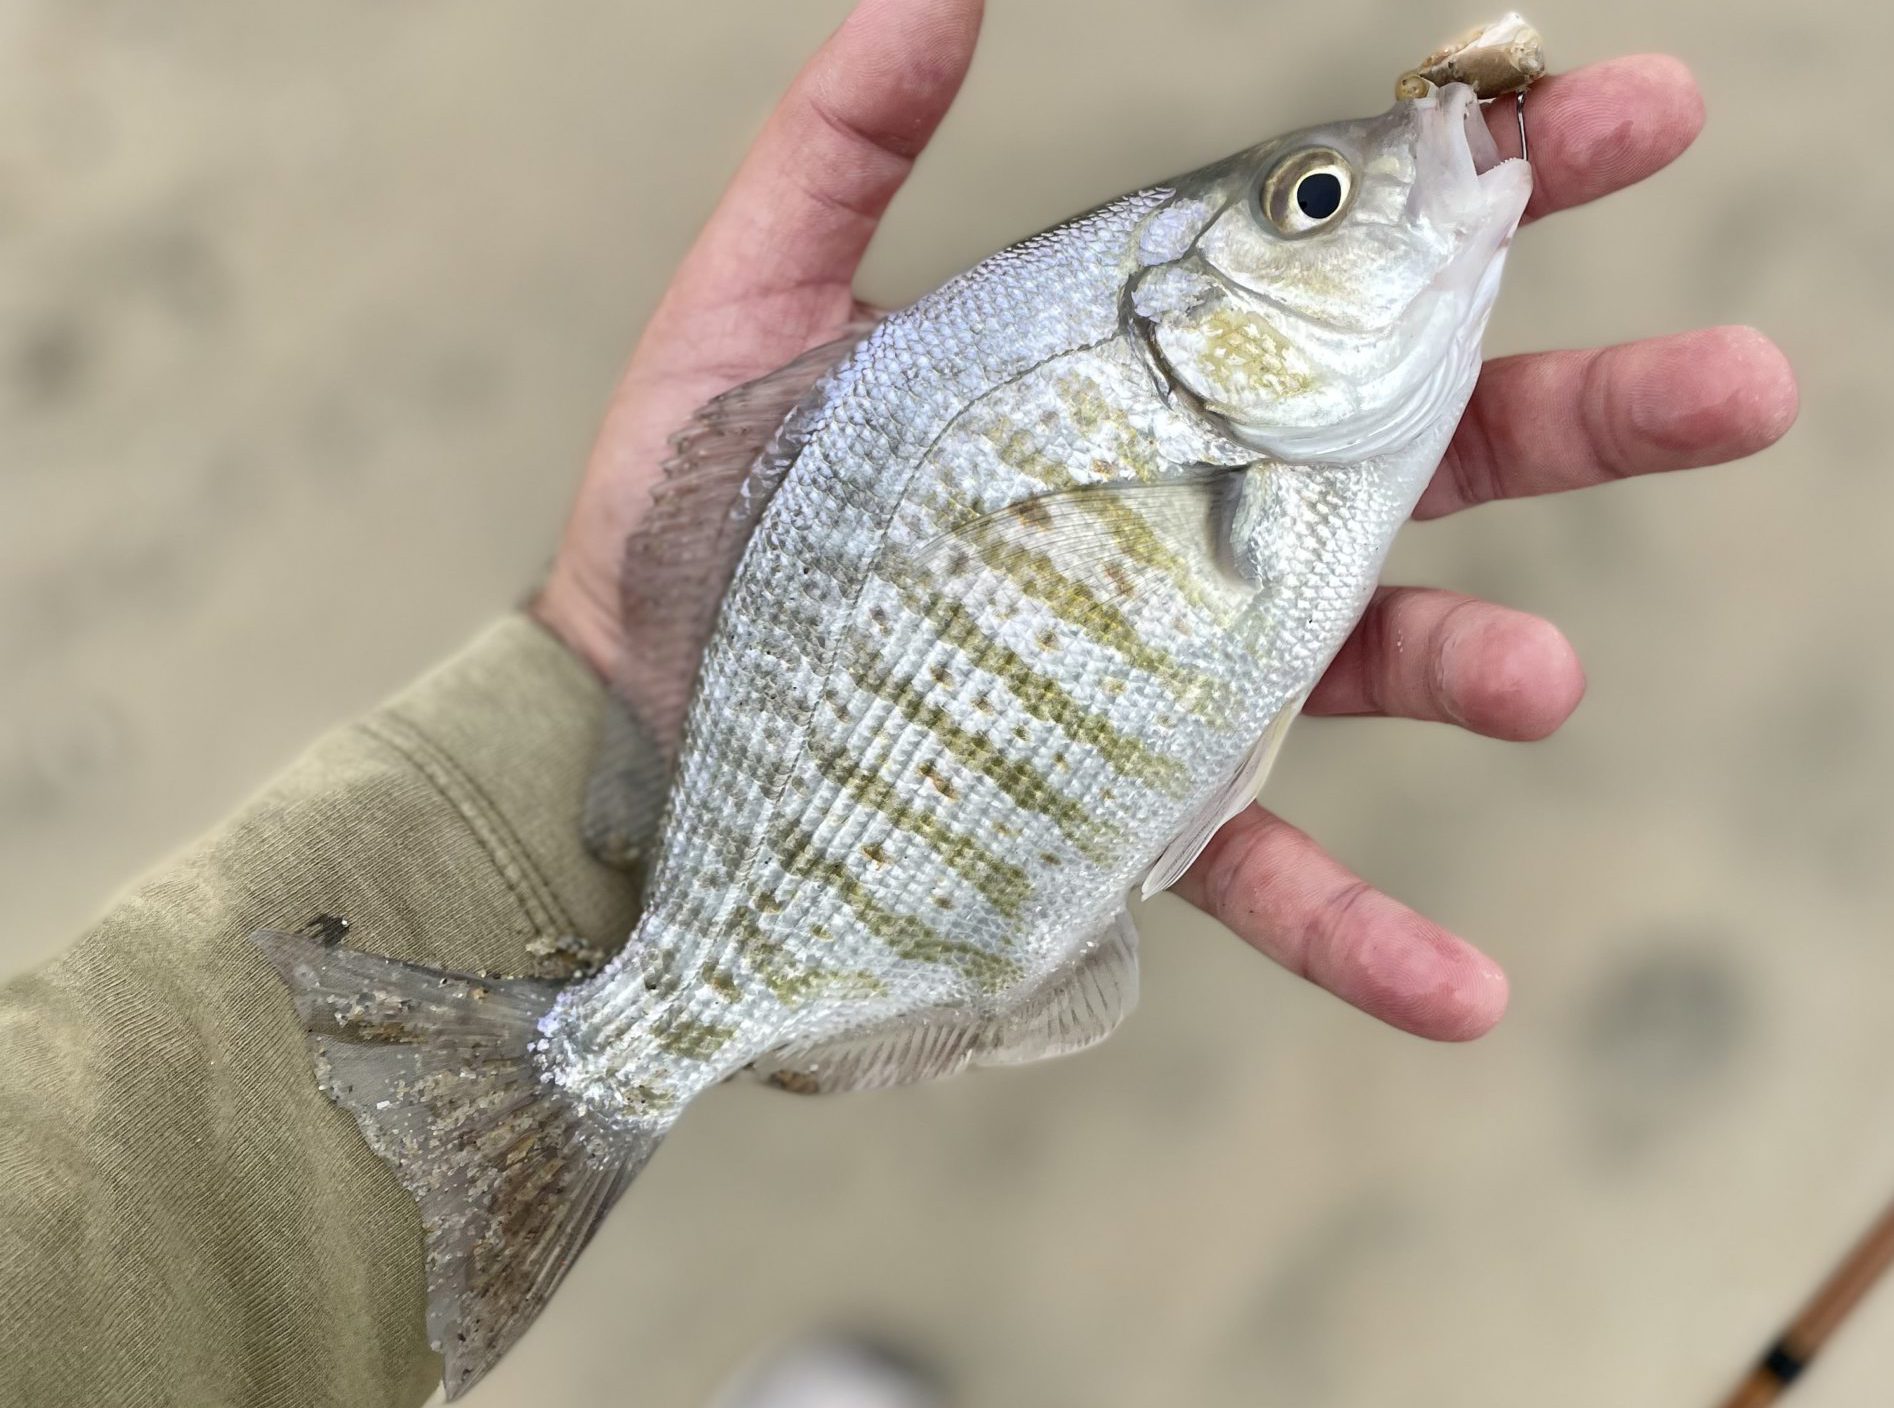 Surf fishing – 5 tips to catch more surfperch on the West Coast this winter